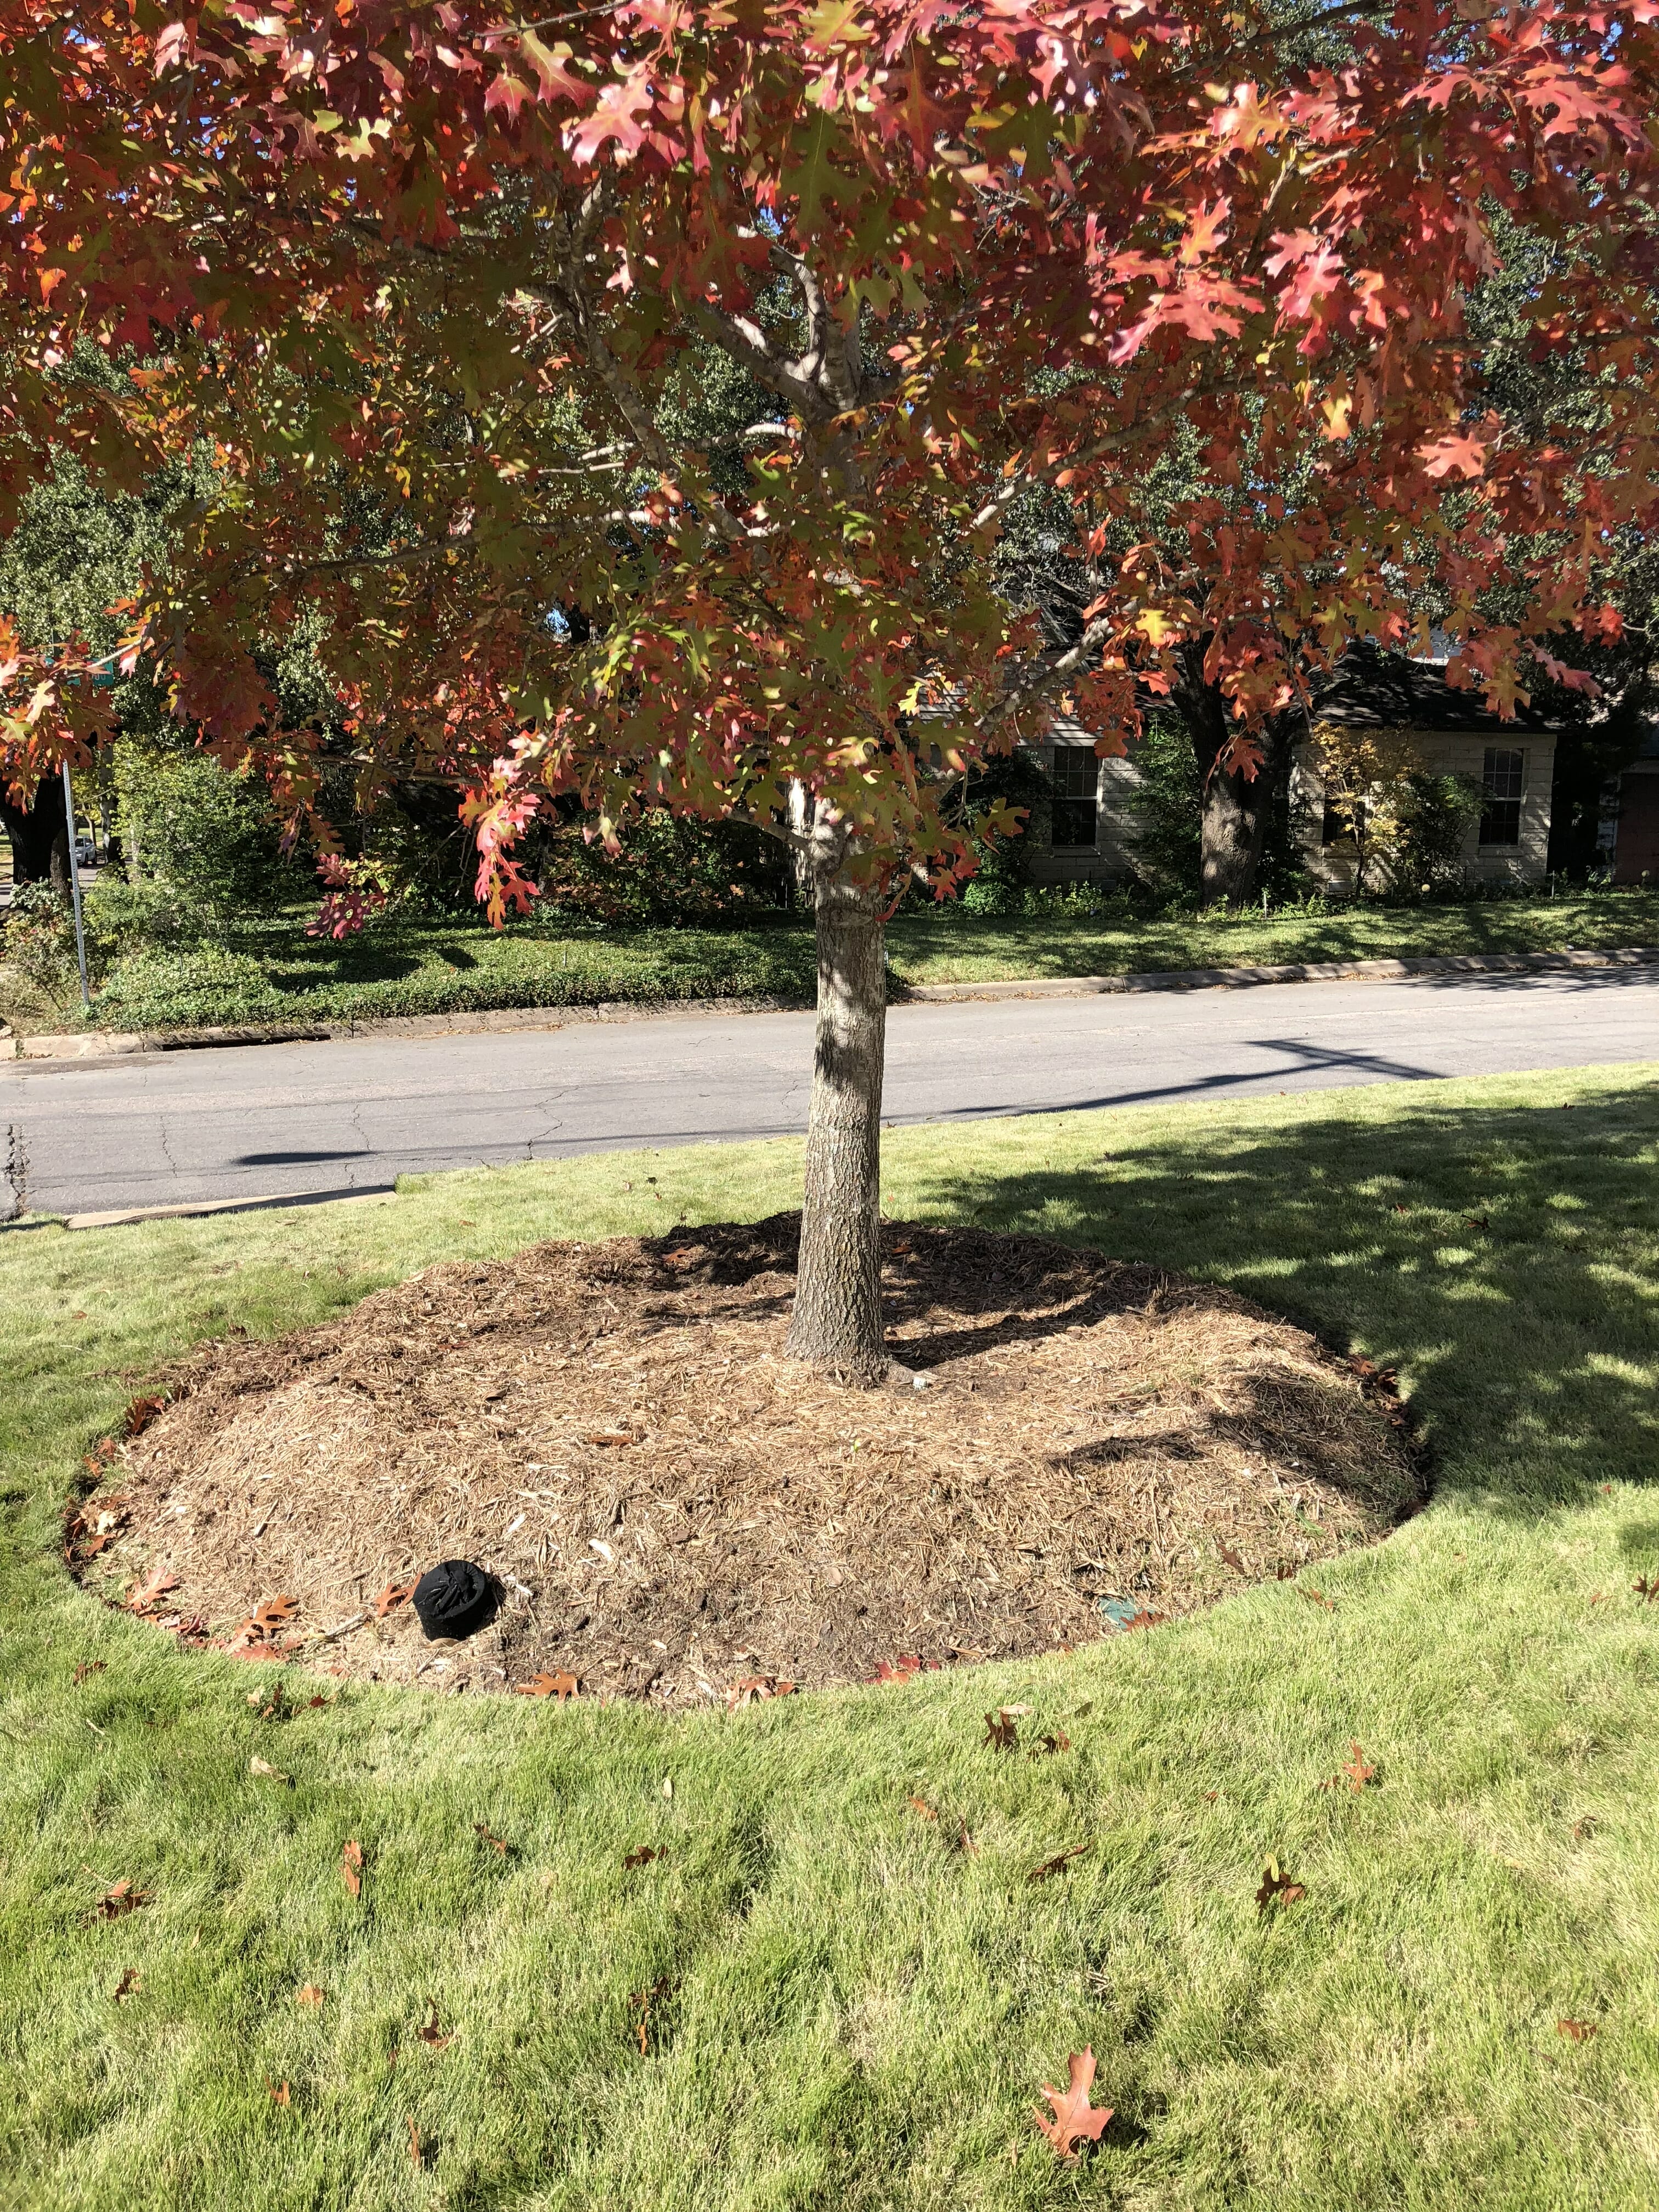 Can I Use Wood Chip Mulch From a Tree Service?